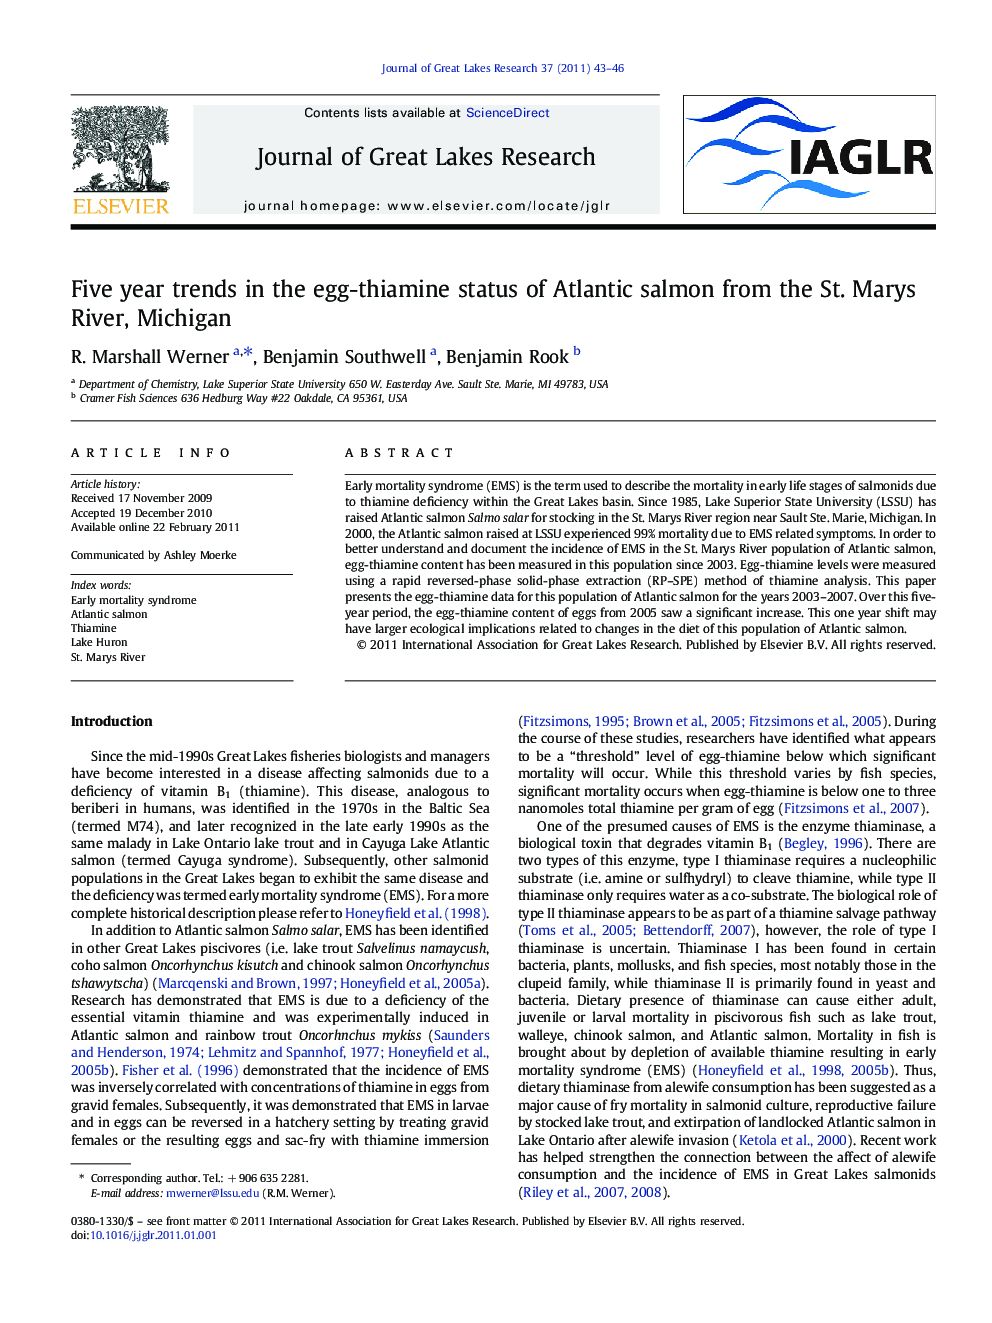 Five year trends in the egg-thiamine status of Atlantic salmon from the St. Marys River, Michigan